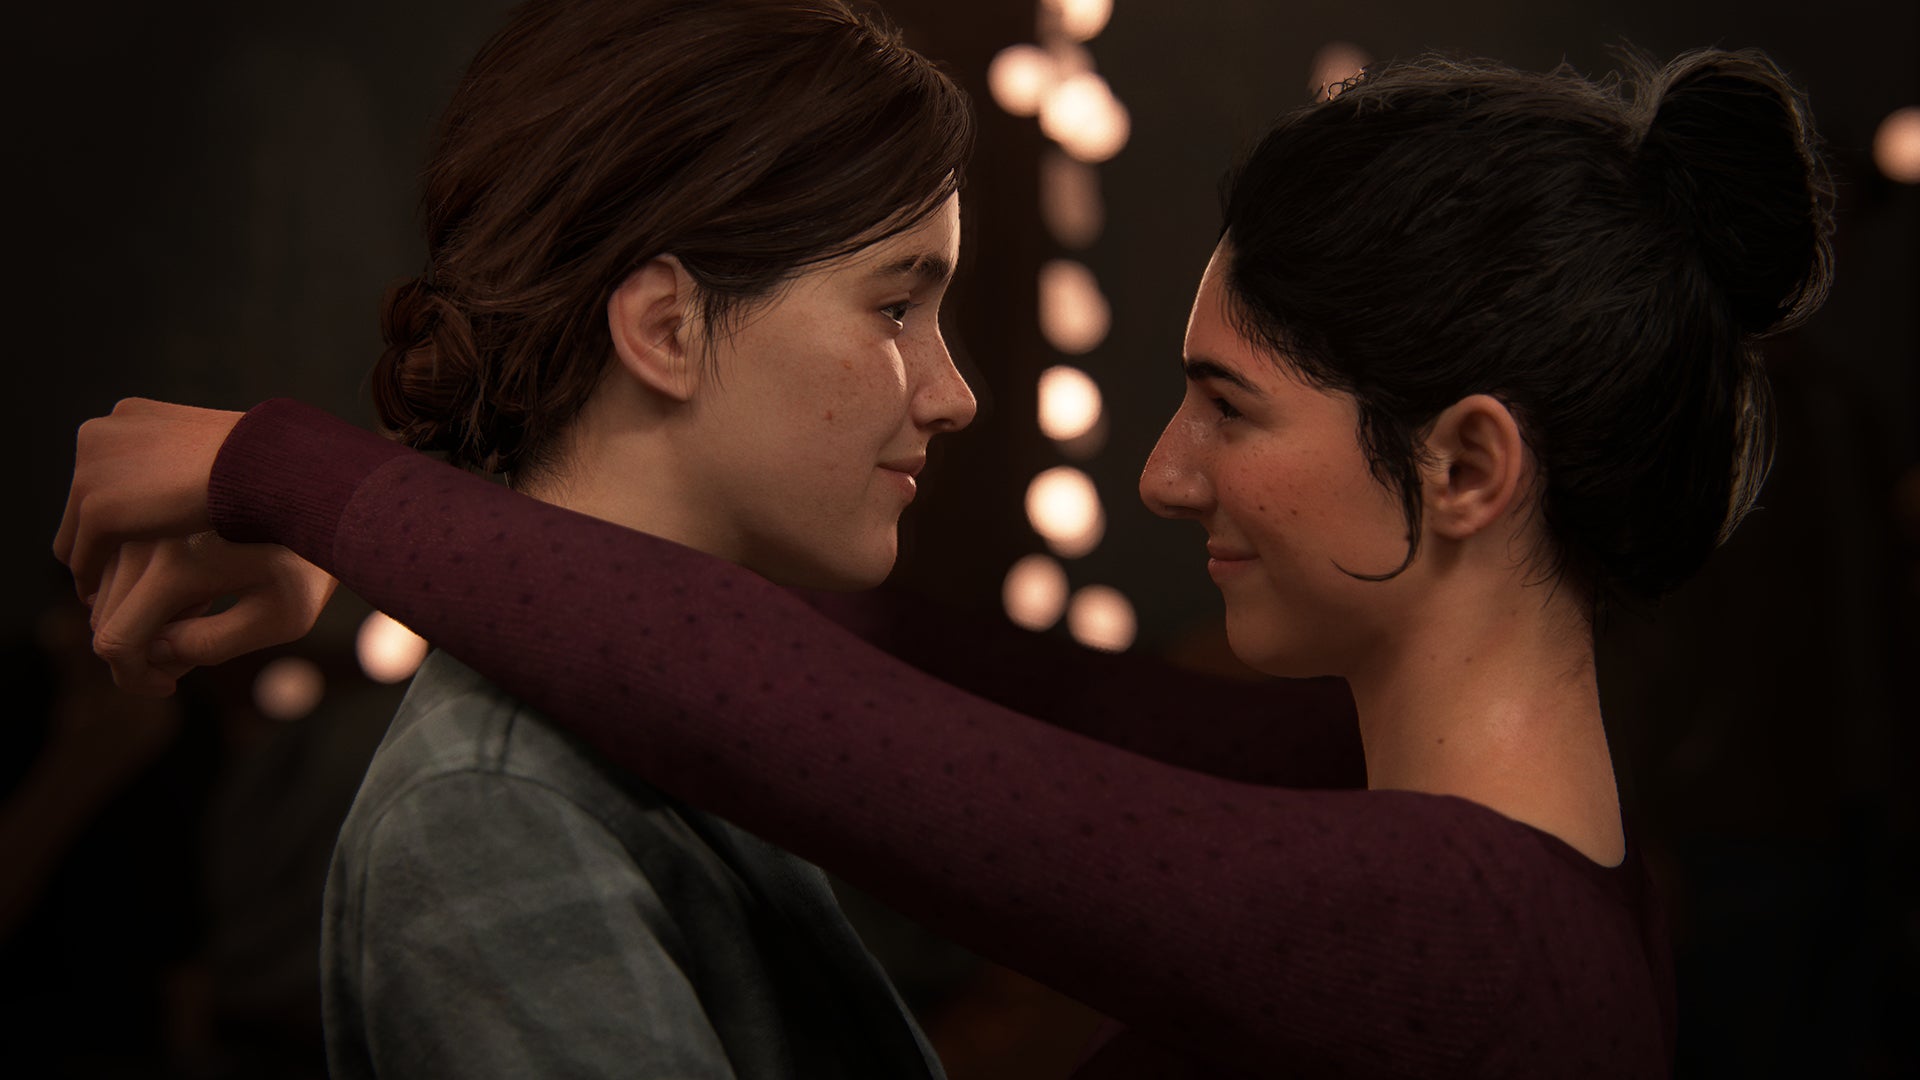 Image for The Last of Us Part 2 has more game of the year awards than The Witcher 3, the previous record holder